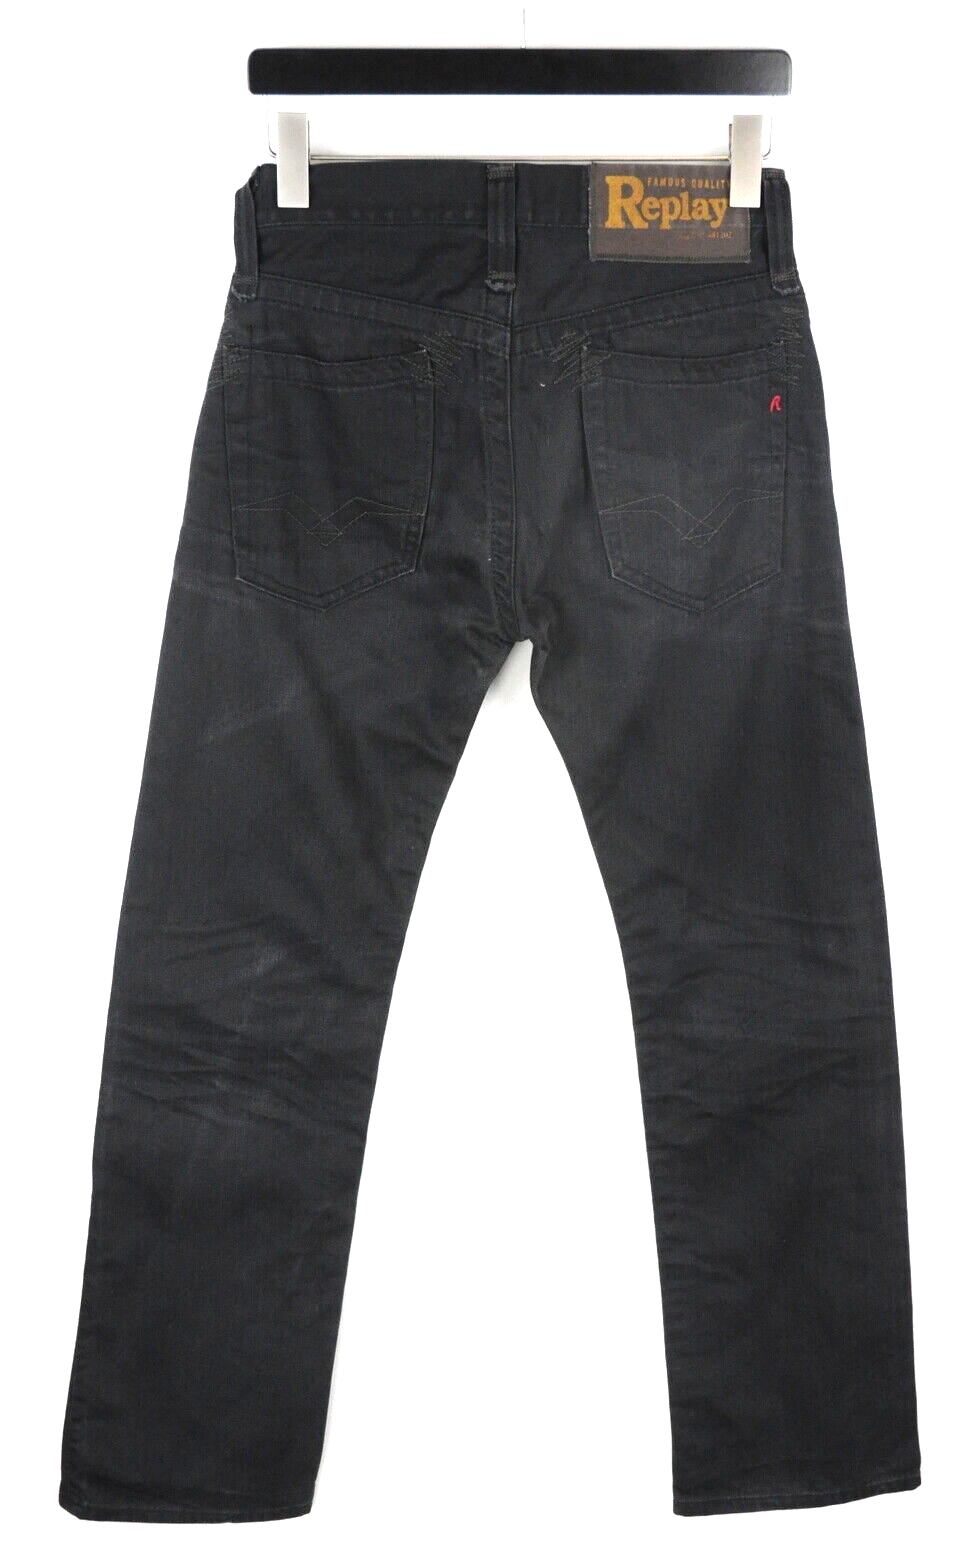 Fly REPLAY Regular | Jeans Fit Black eBay Straight Mens Button W28/L32